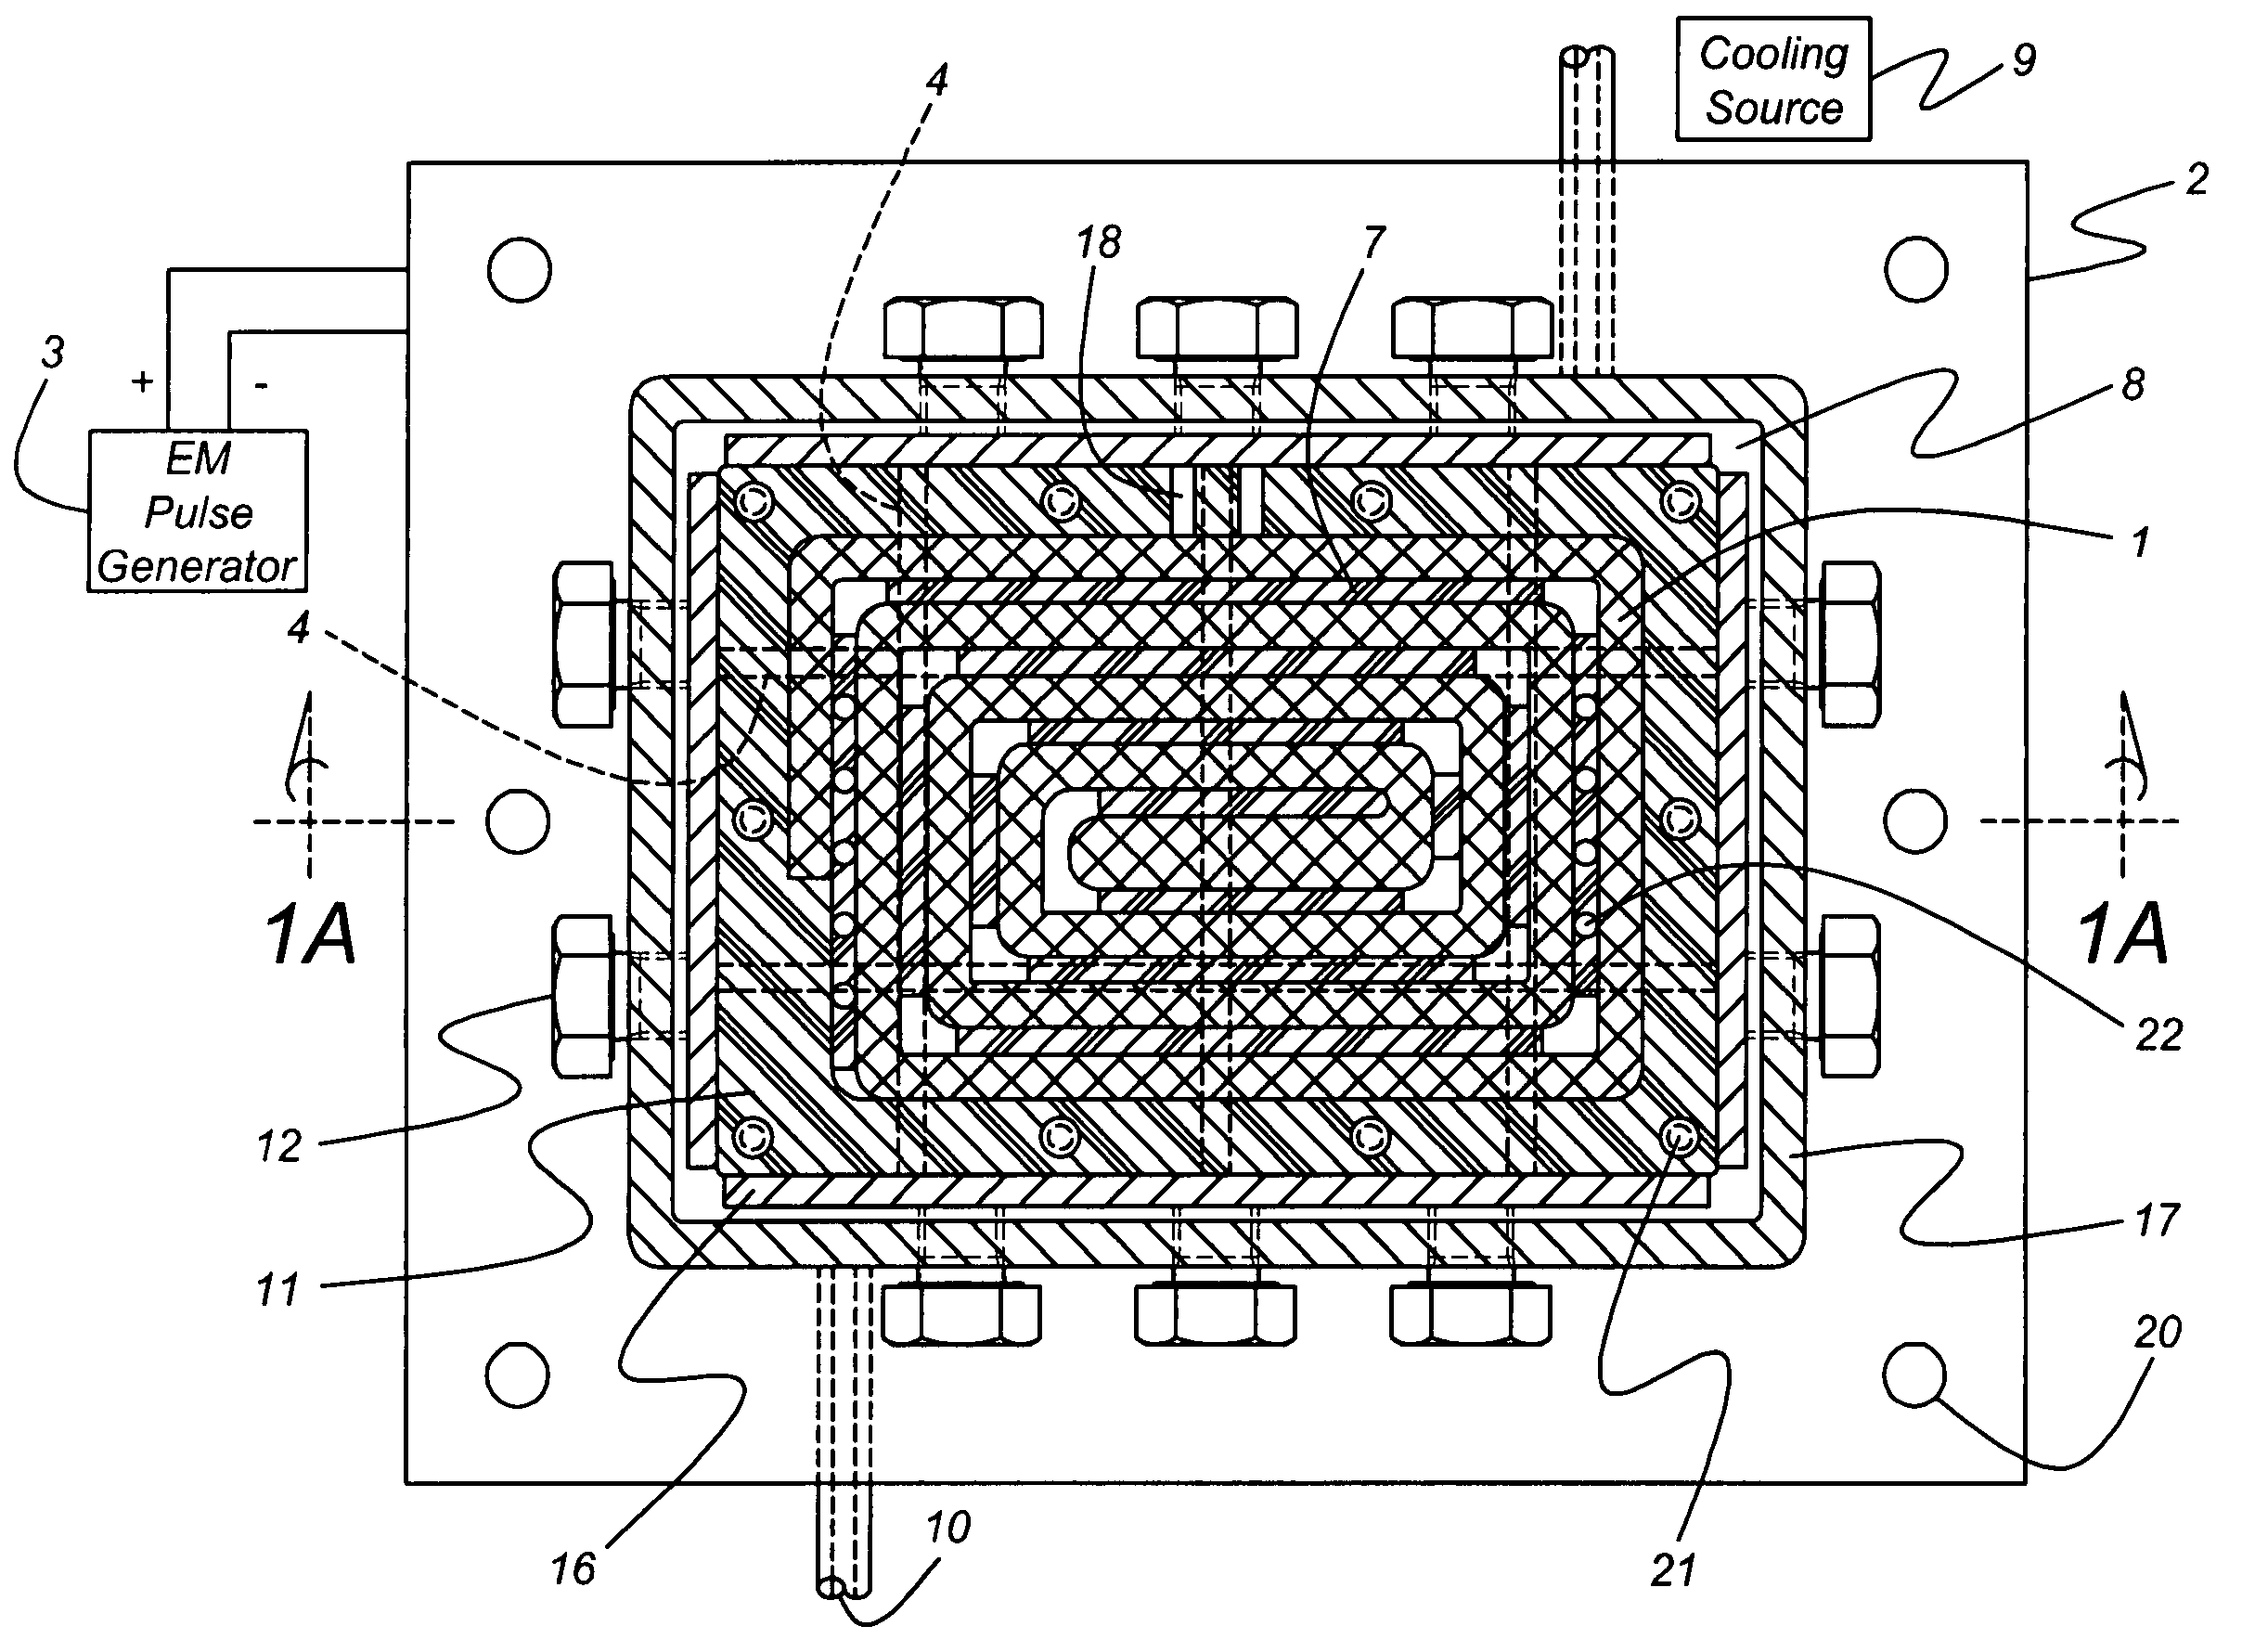 Apparatus for electromagnetic forming with durability and efficiency enhancements